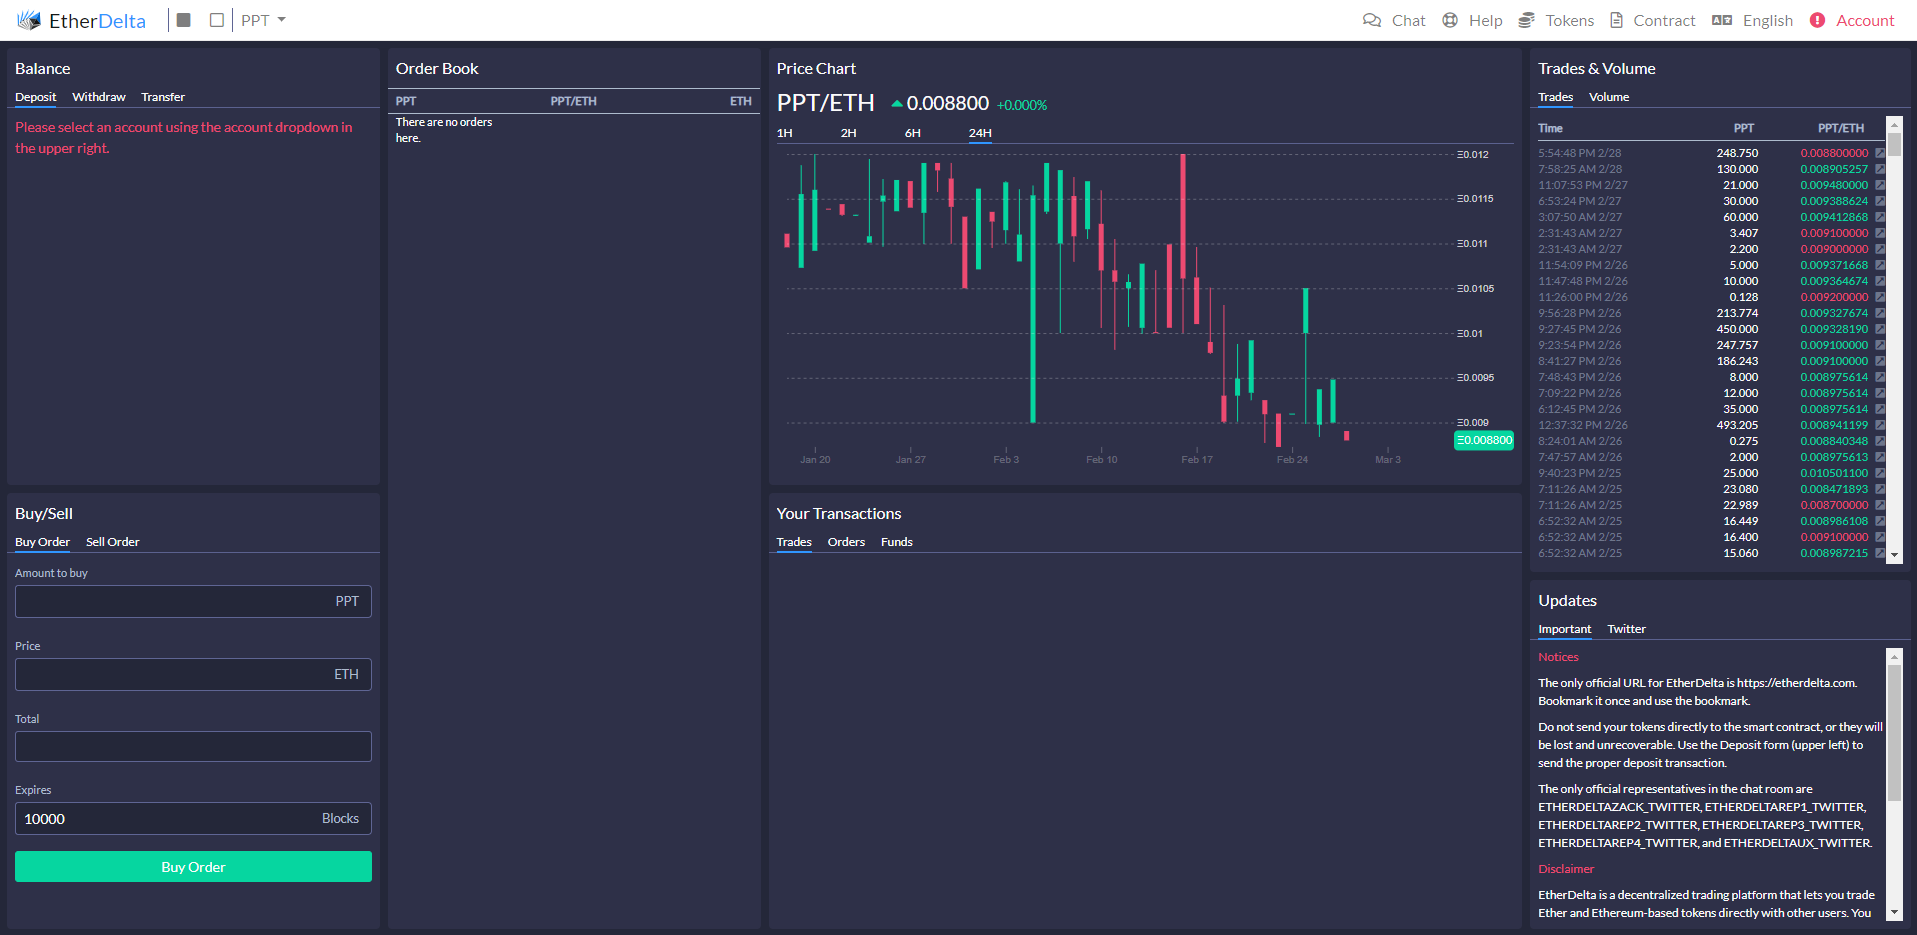 Guide to Etherdelta Exchange: How to Trade on Etherdelta